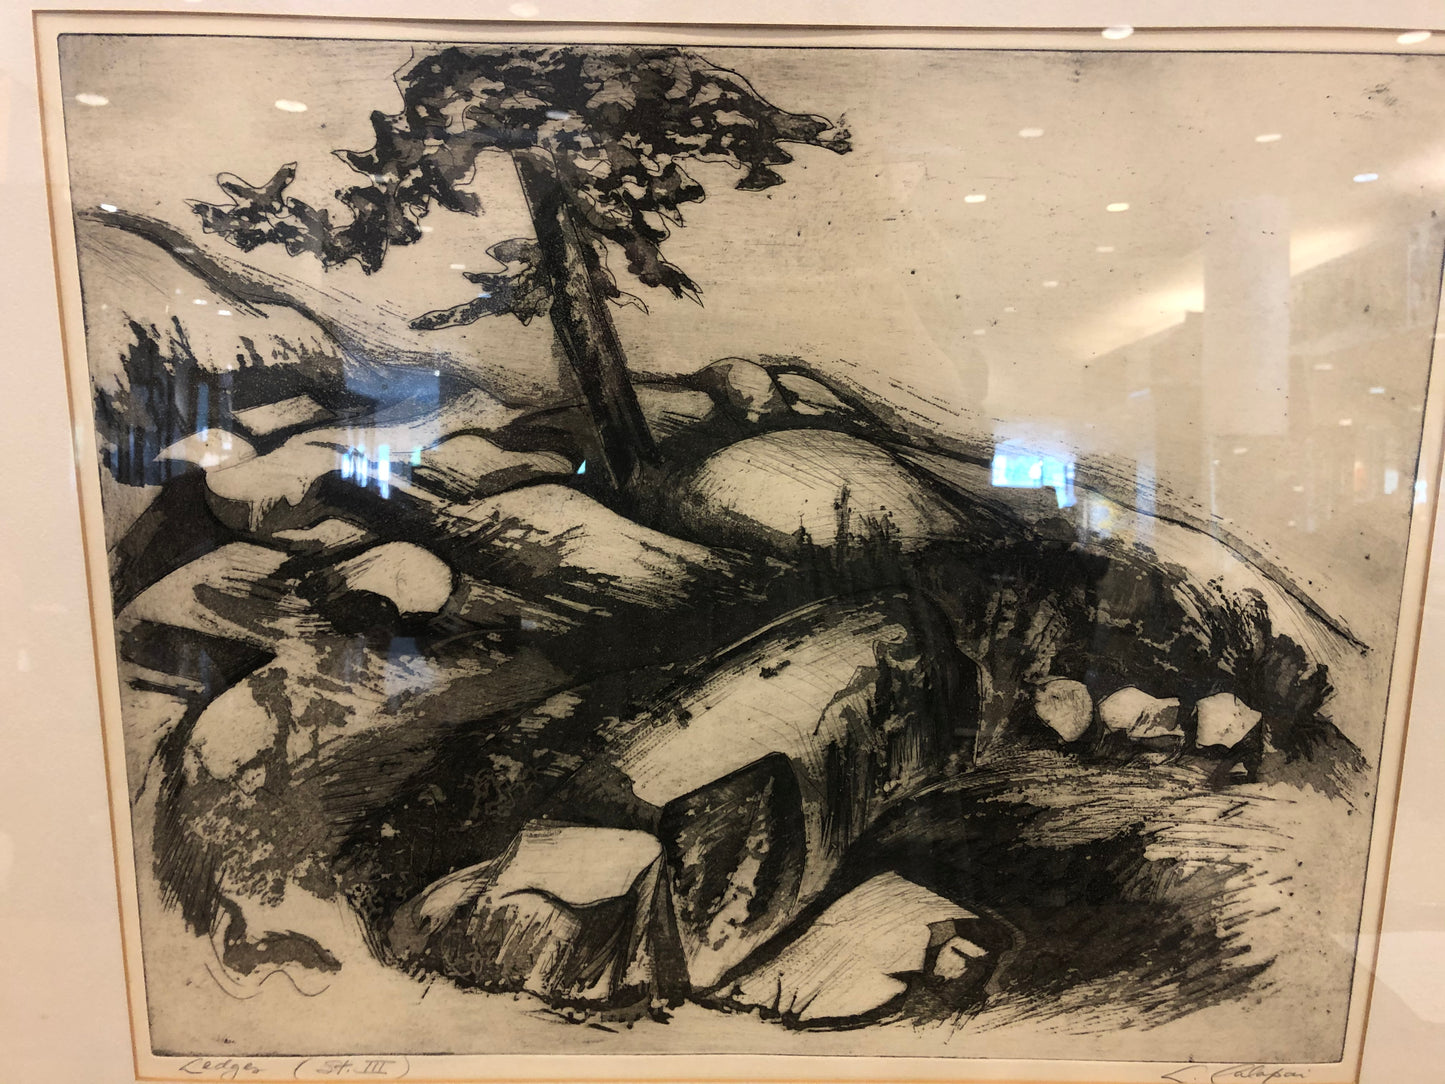 Letterio Calapai Framed Etching "Ledges"